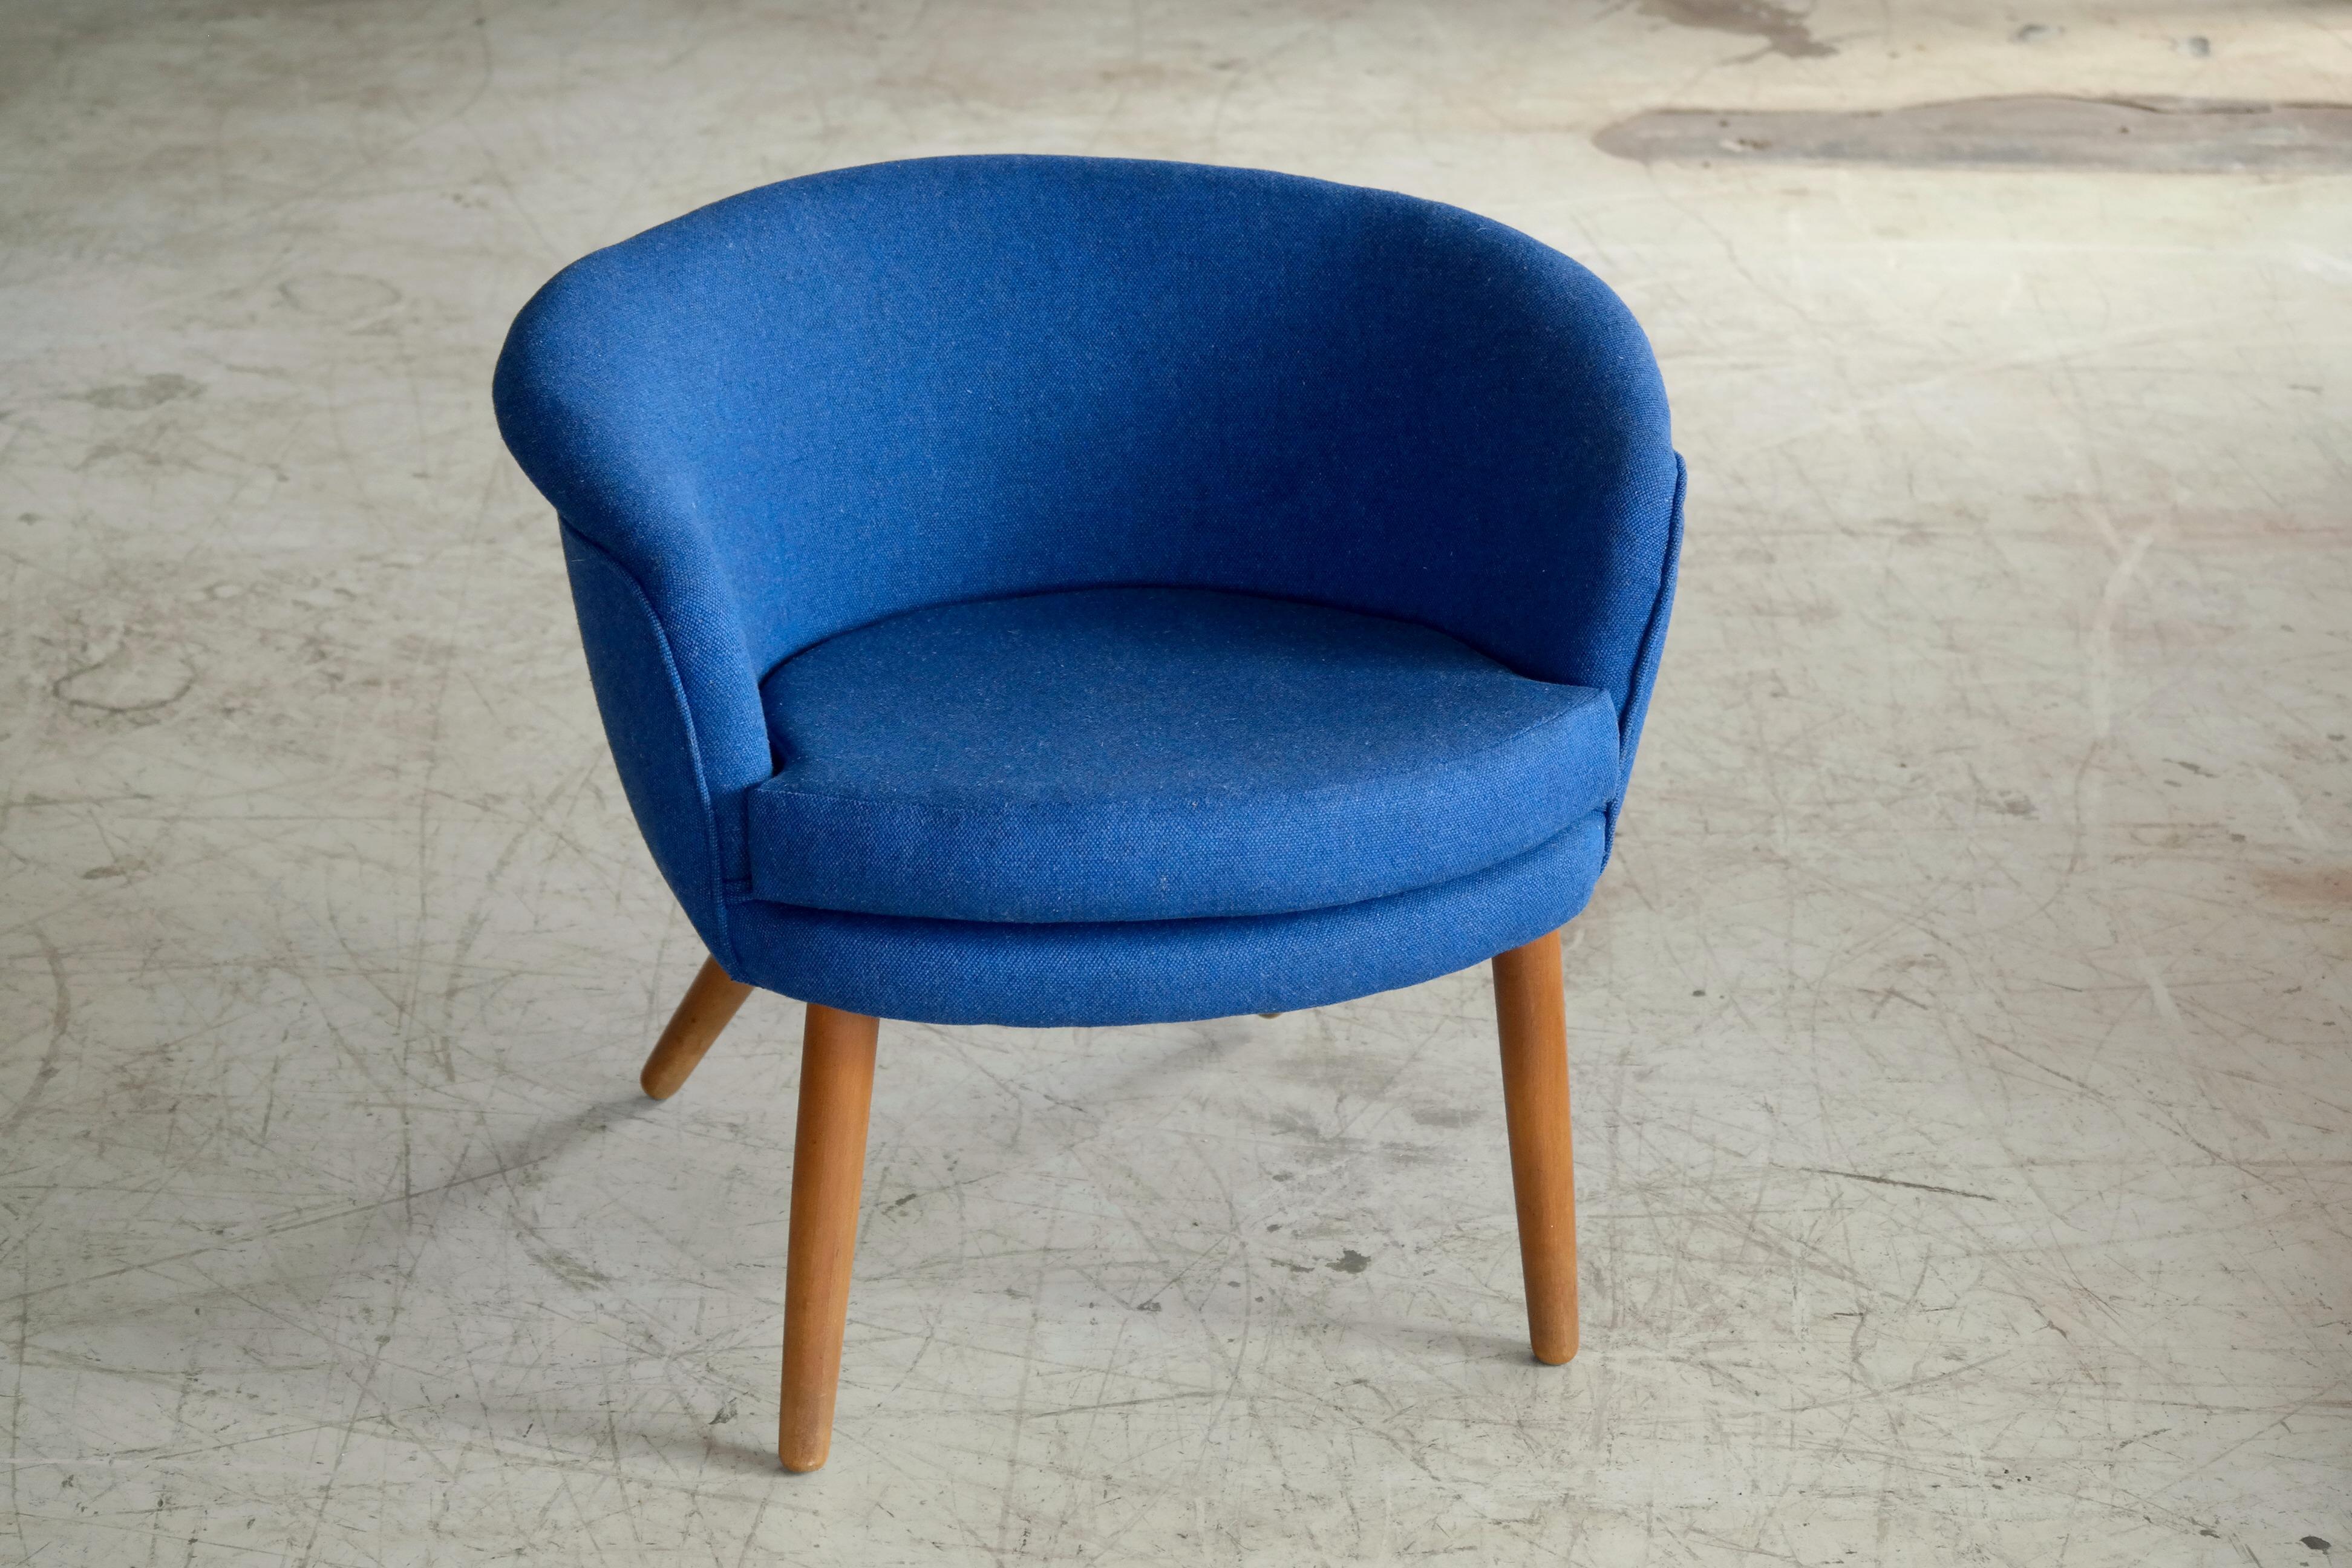 Charming easy chair made in Denmark in the 1950s. Newly re-upholstered in blue wool fabric by Camira and raised on legs of solid oak. Low and light design with a lot of versatility. Unknown Producer and Designer but reminiscent of Nanna Ditzel's